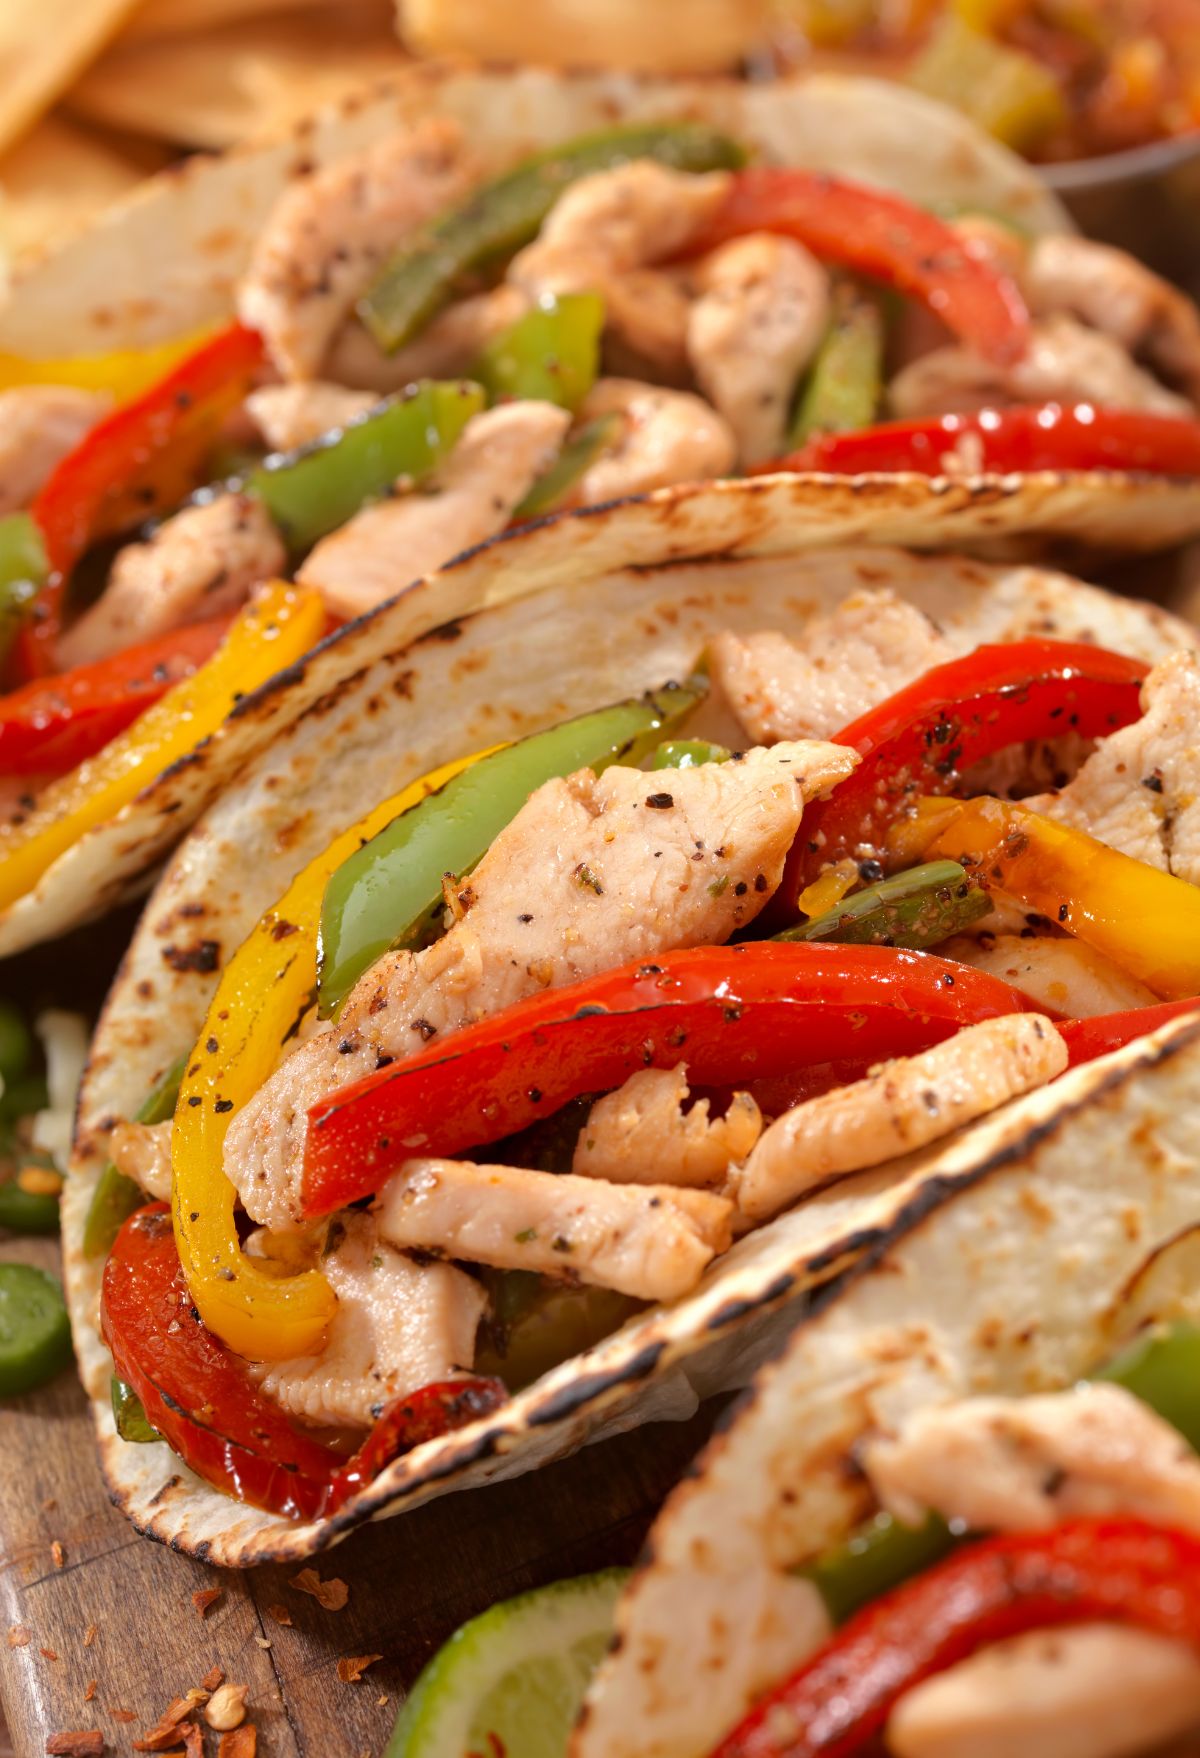 Grilled chicken and bell pepper fajitas served in warm tortillas.